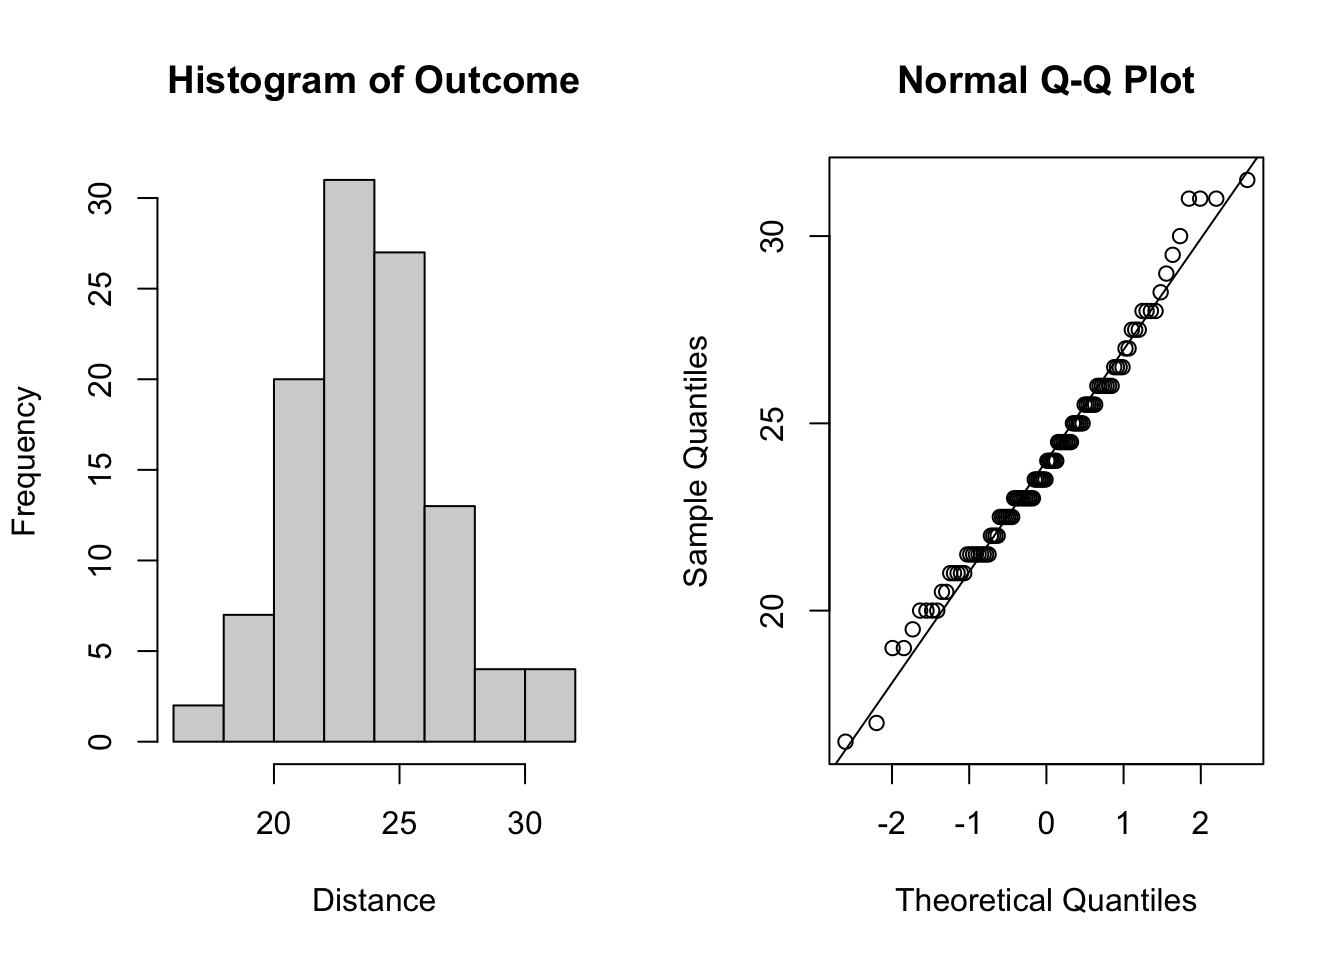 Plots for assessing normality of the outcome.